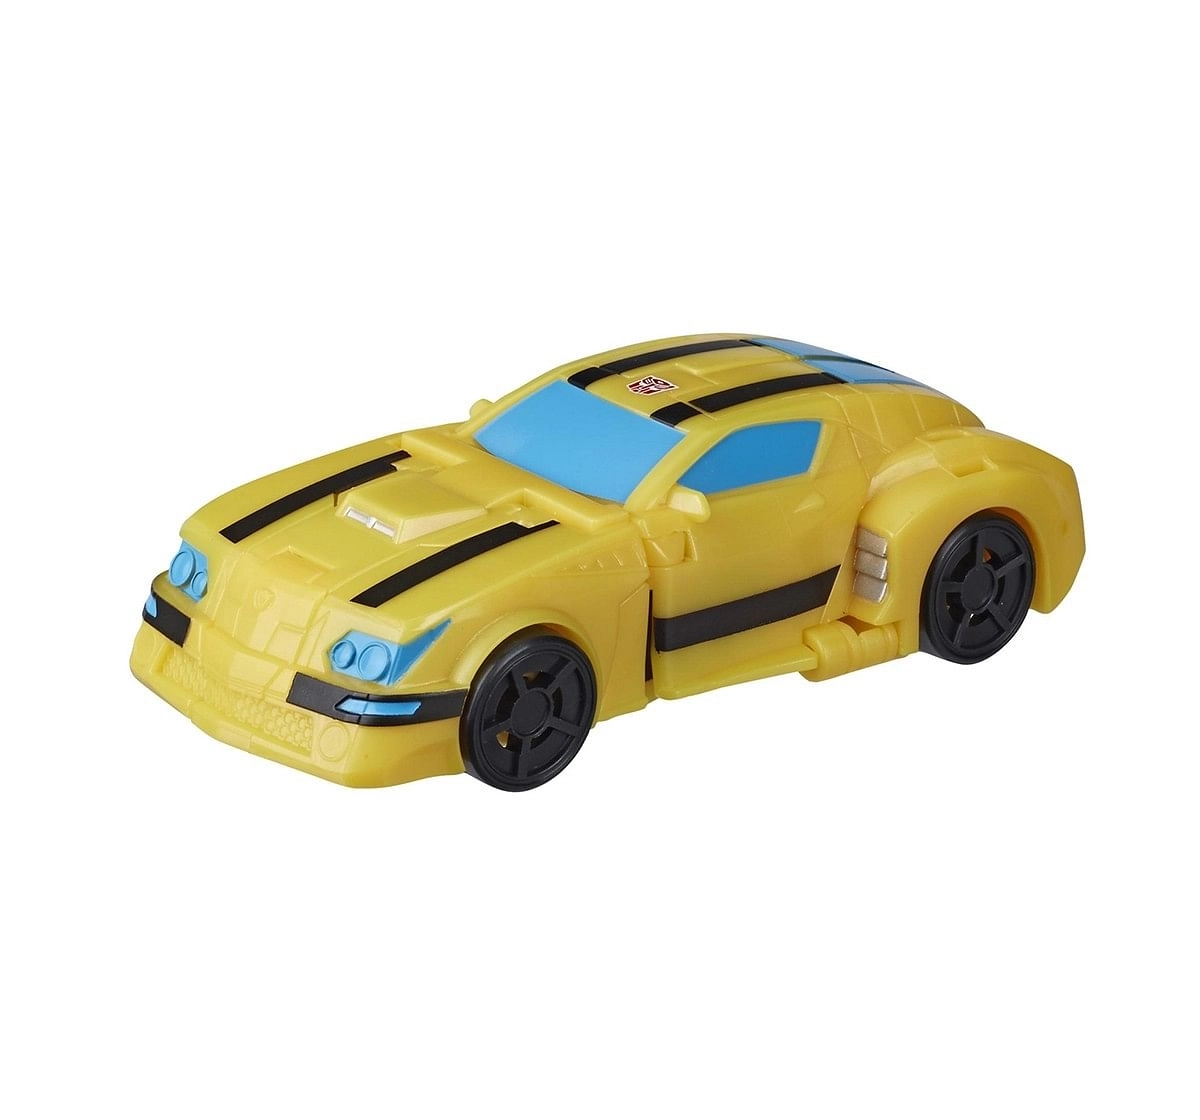 Transformers Cyberverse Deluxe Class Bumblebee Assorted Action Figures for Kids age 6Y+ 